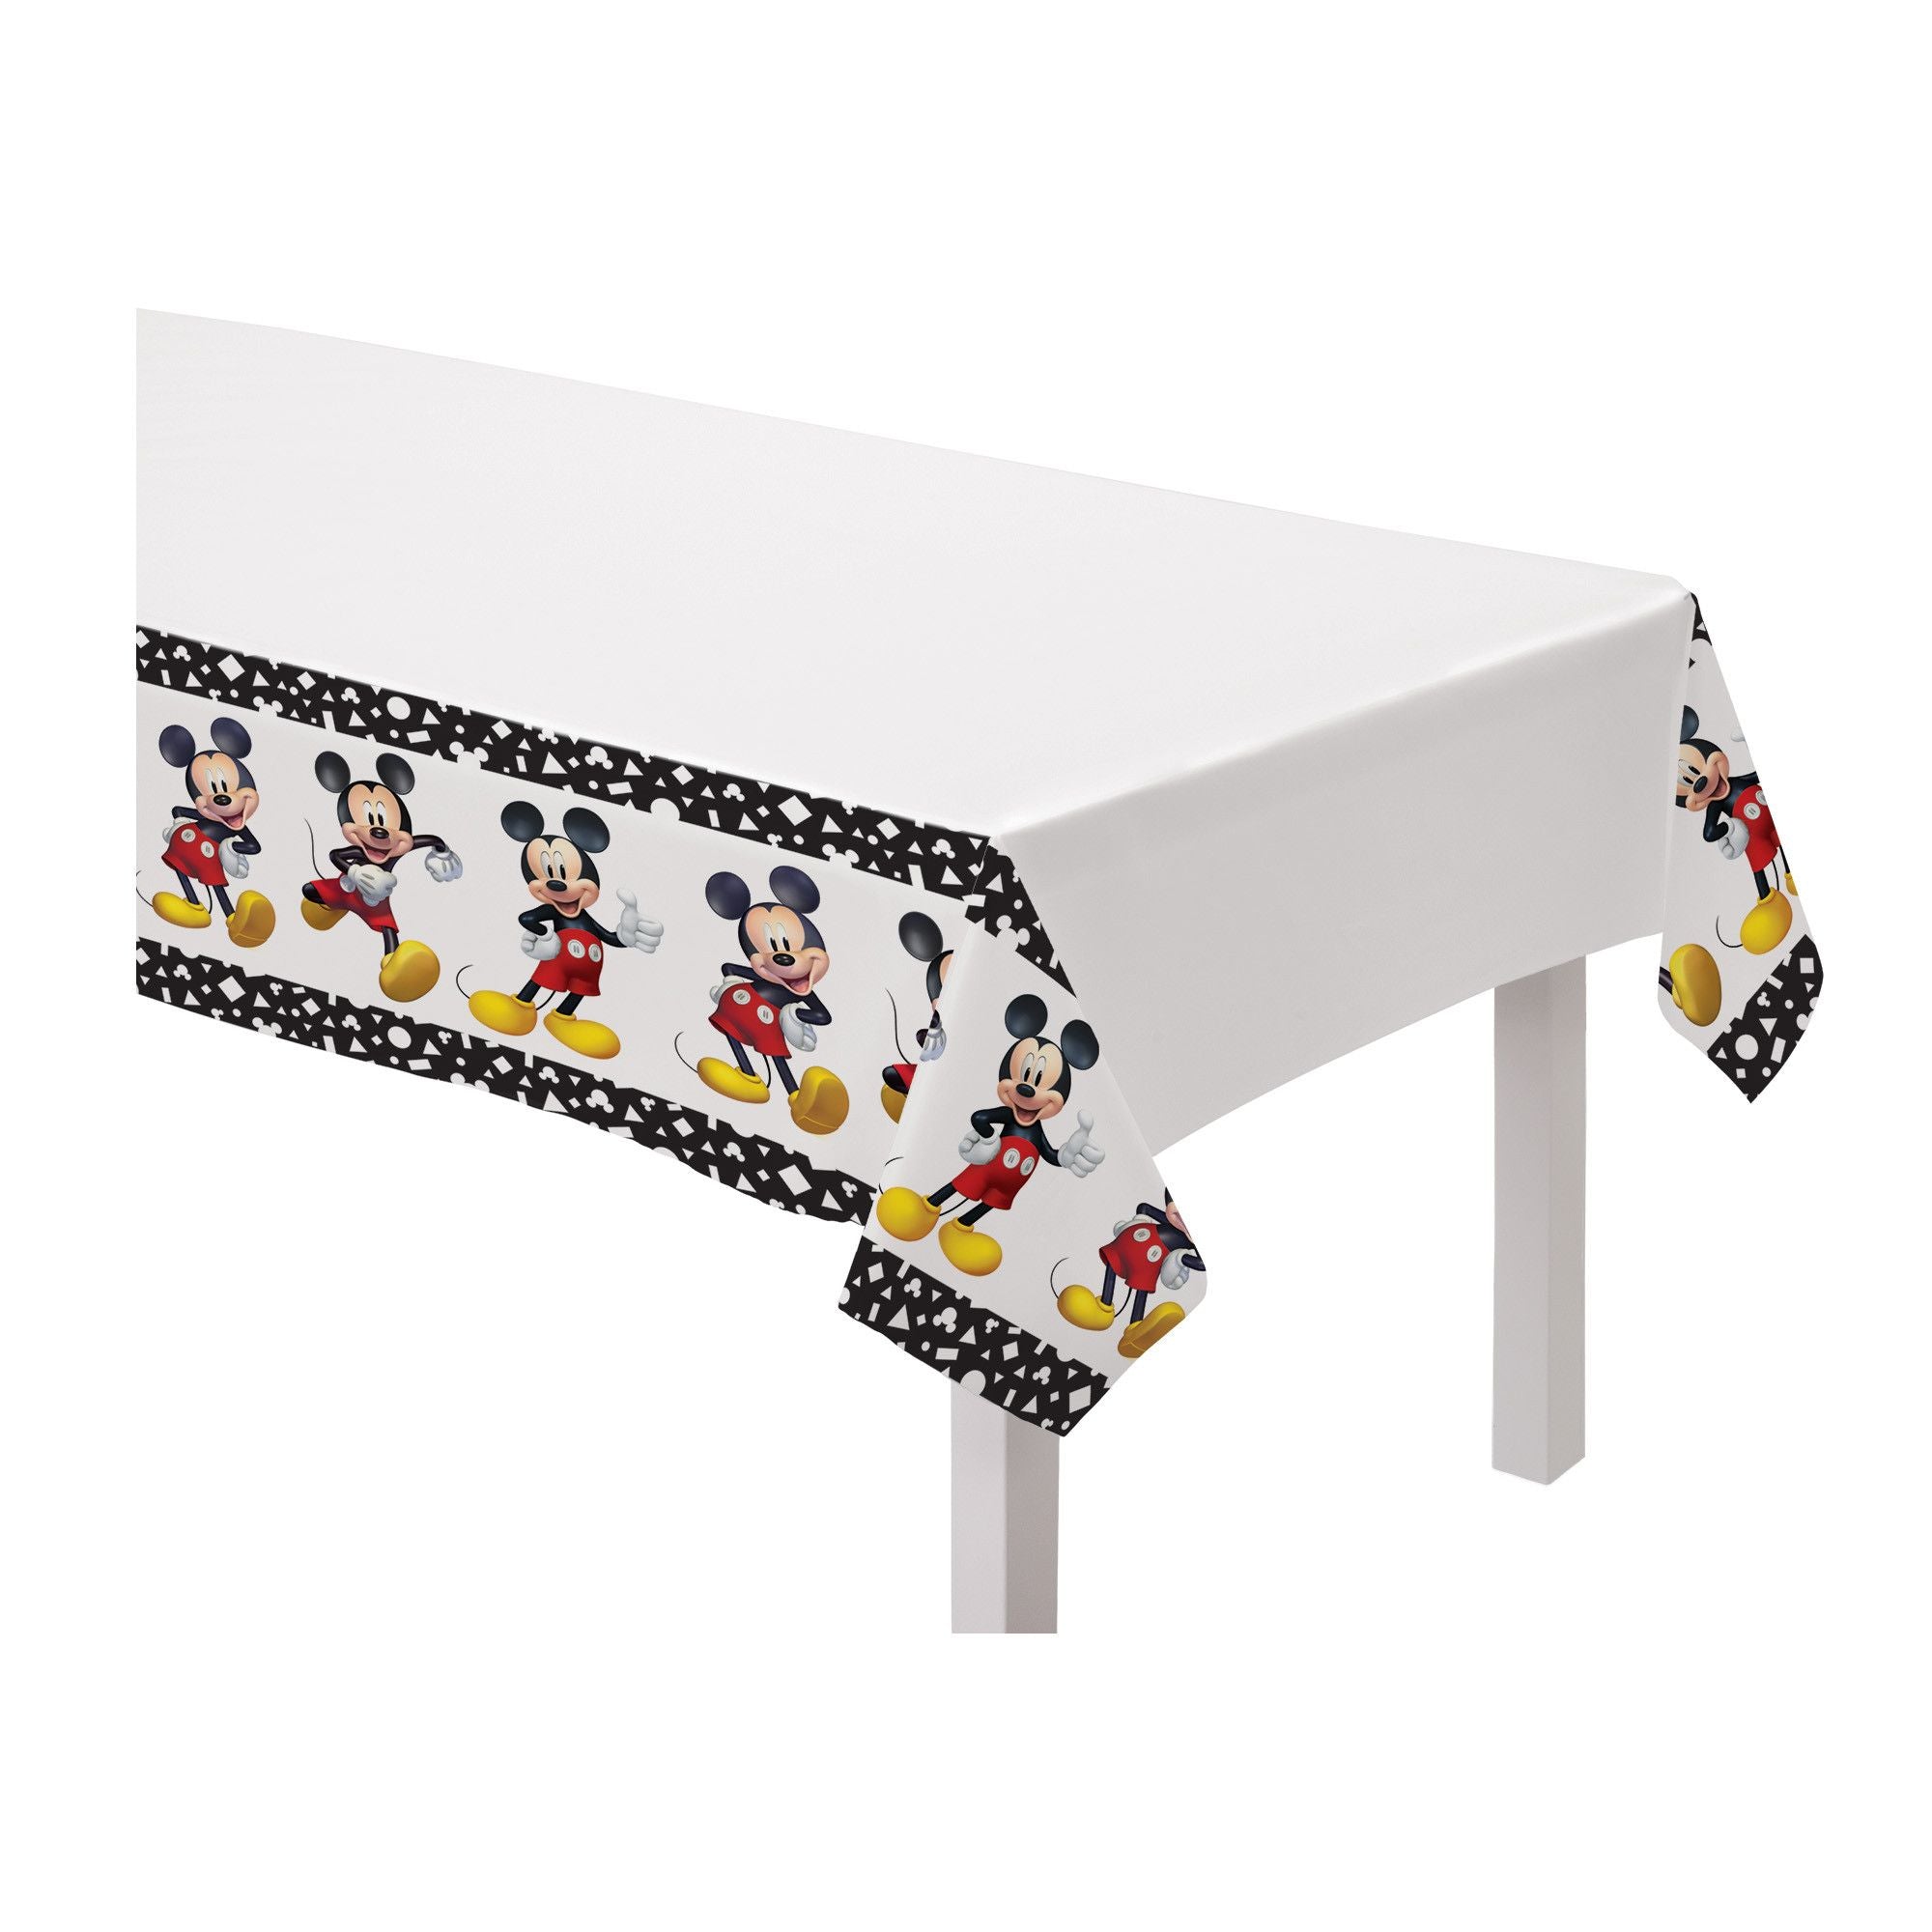 Amscan BIRTHDAY: JUVENILE Mickey Mouse Forever Plastic Table Cover